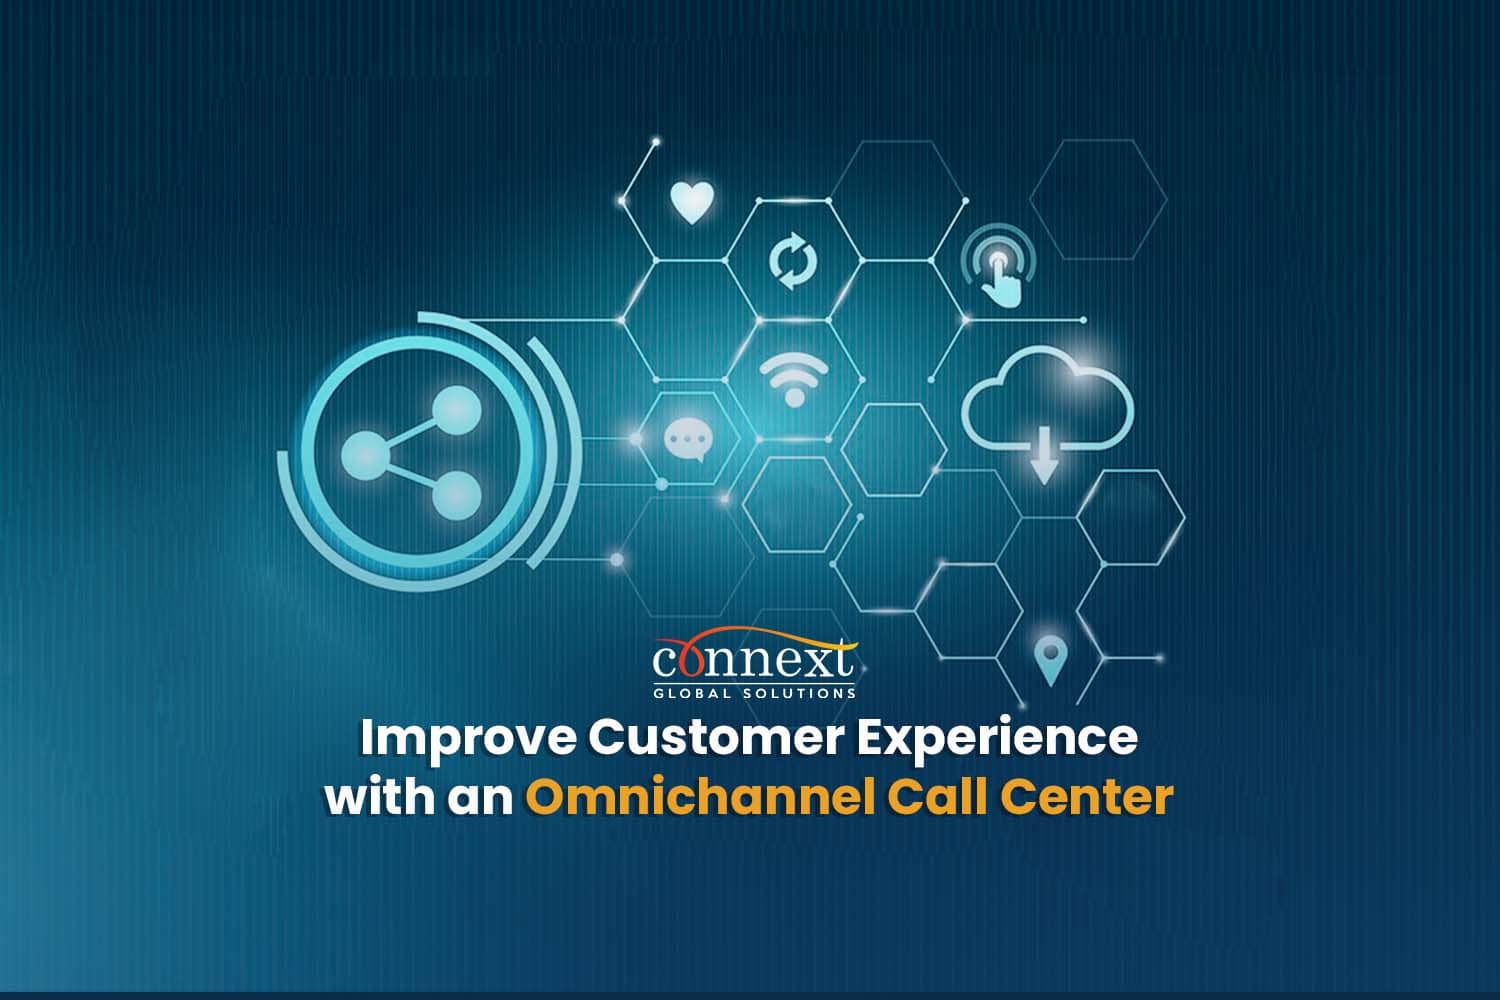 Improve Customer Experience with an Omnichannel Call Center